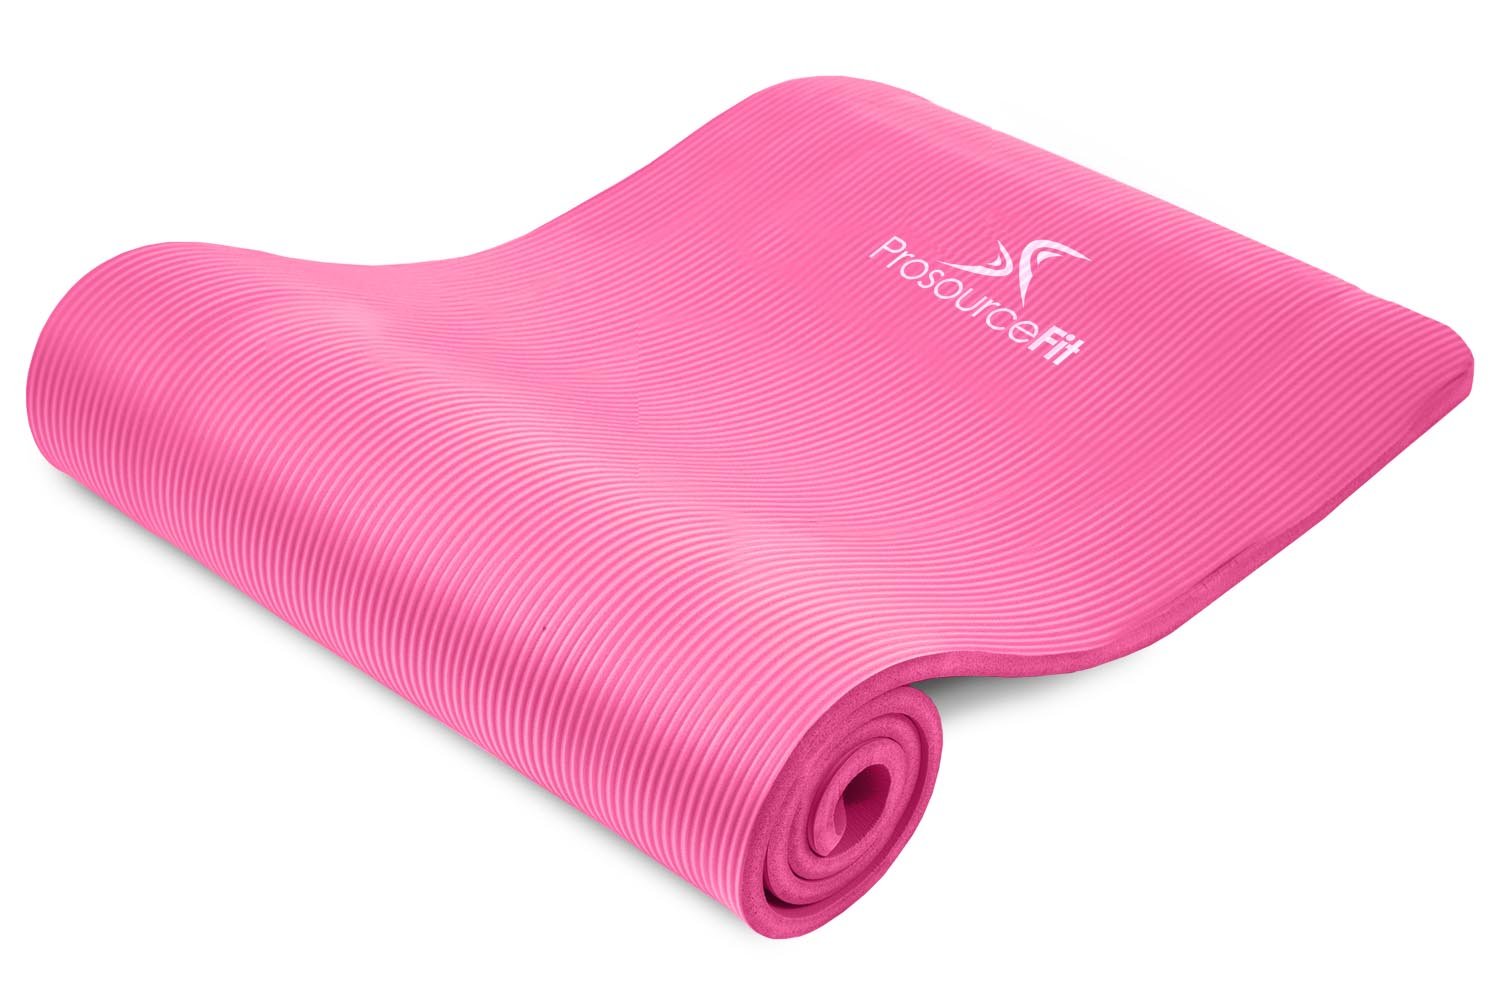 Extra Thick Yoga and Pilates Mat 1/2 inch Purple - ProsourceFit